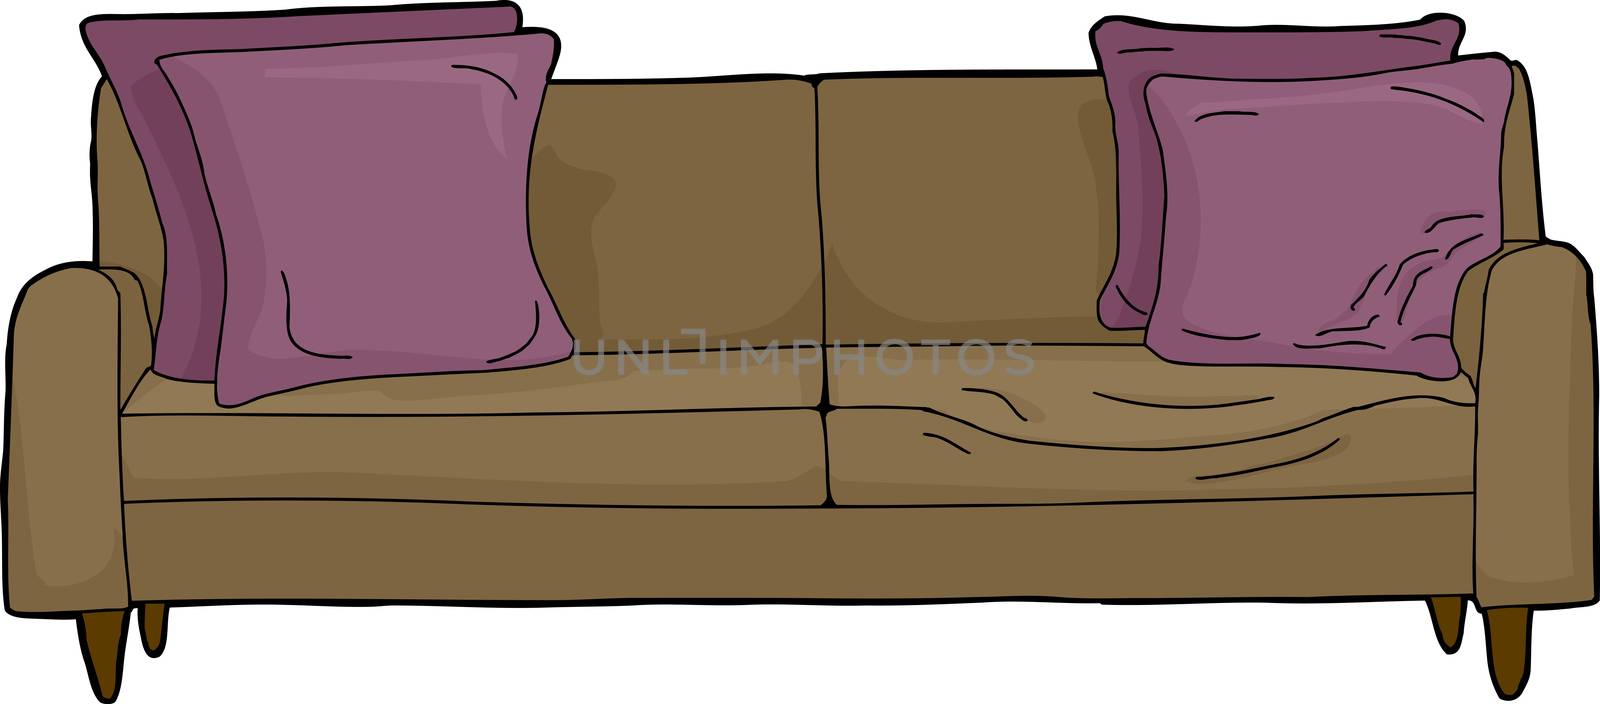 Loveseat with Invsible Person by TheBlackRhino